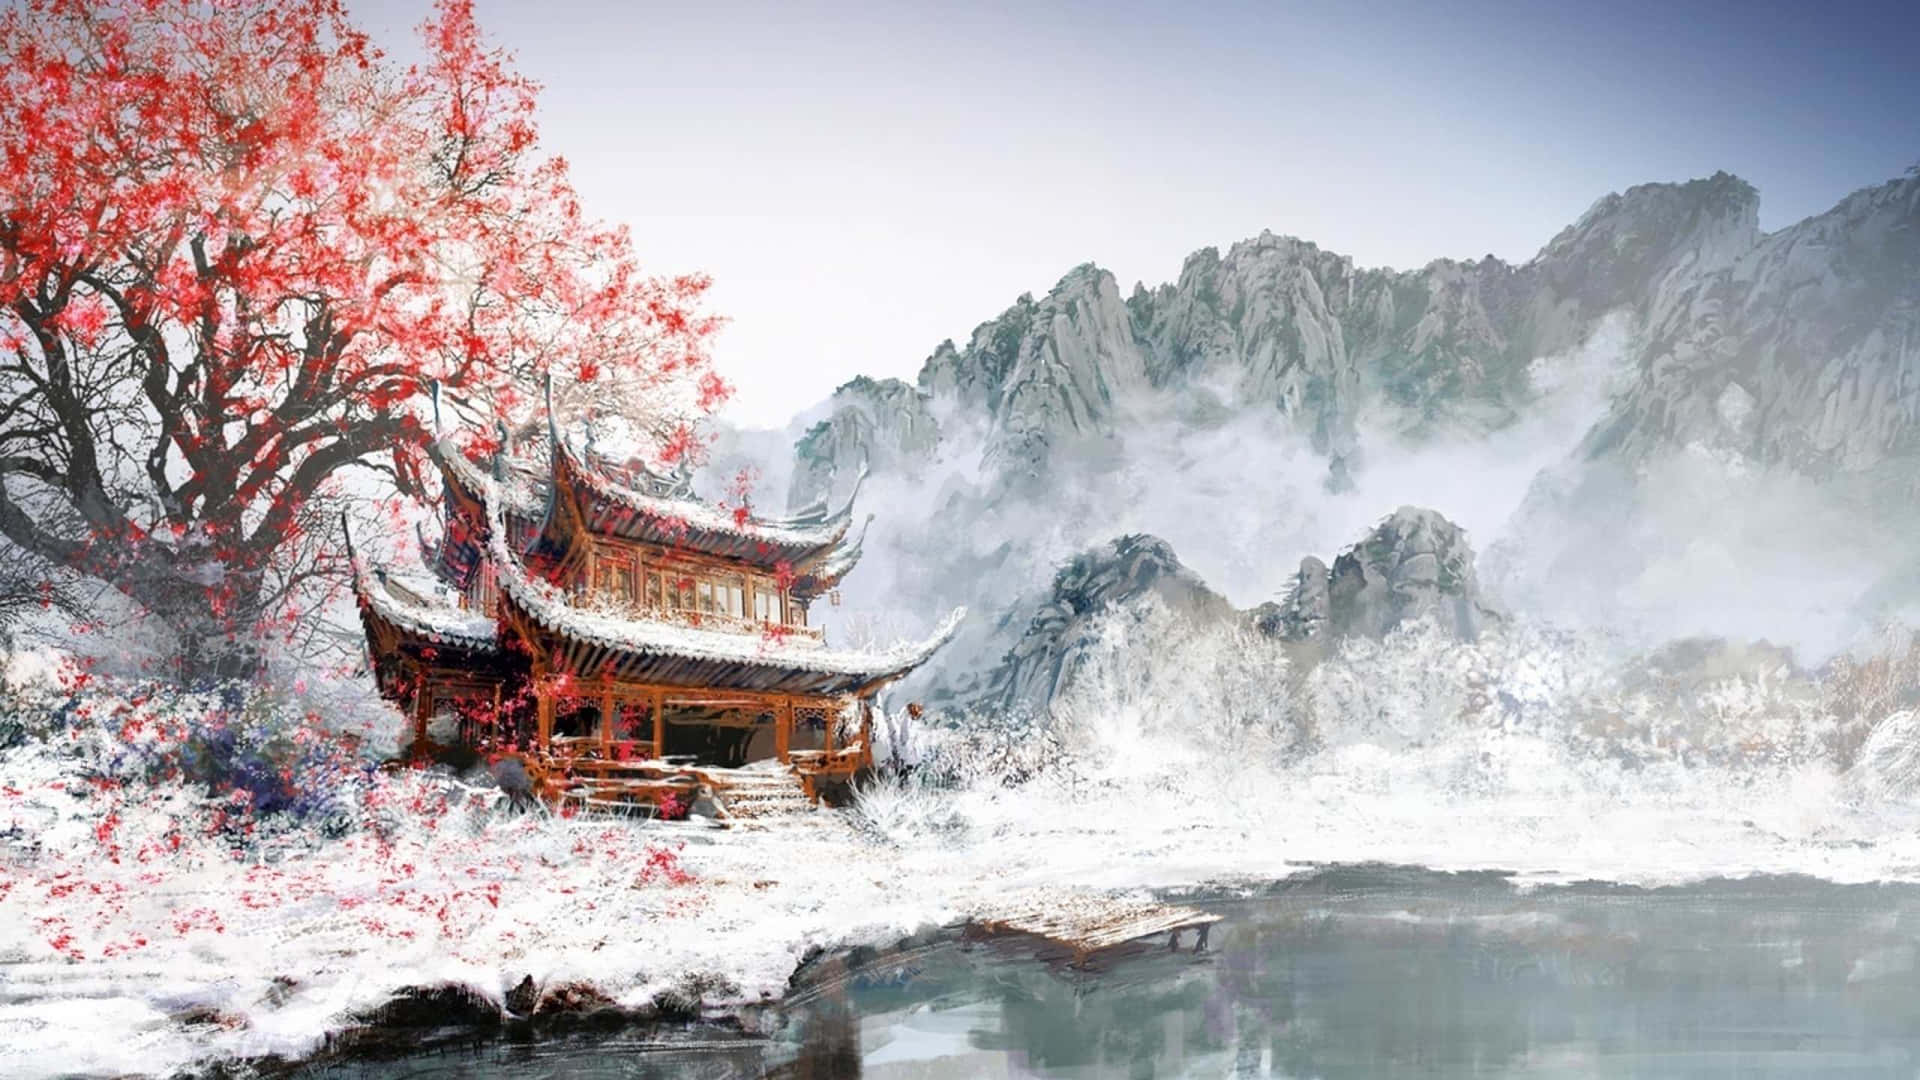 A Chinese House In The Snow With Trees And Mountains